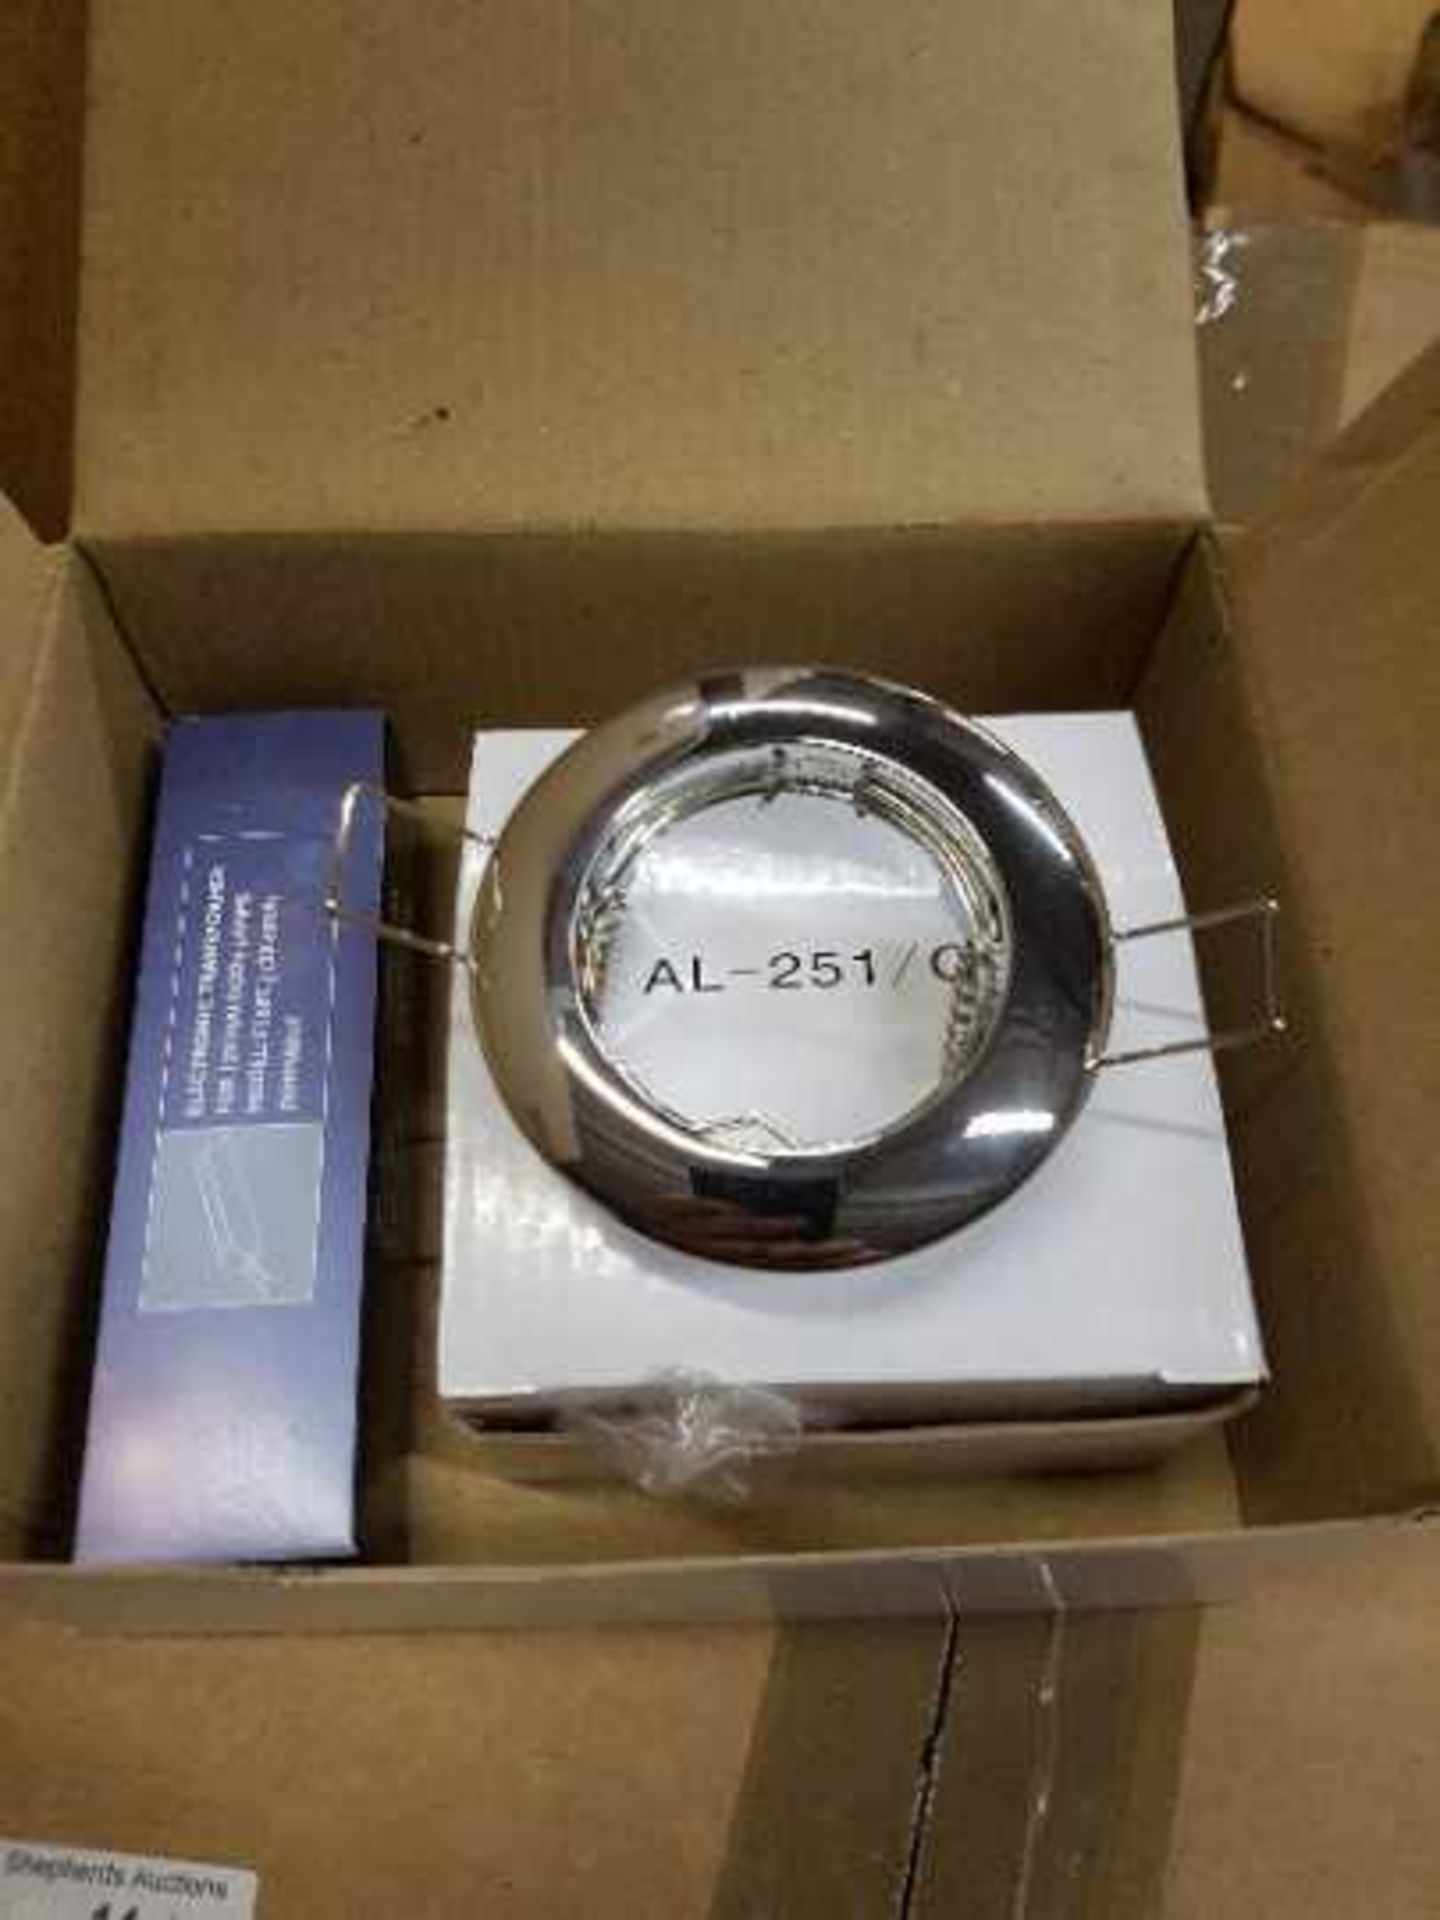 6x Chelsom Chrome Fixed Downlights with Transformer, RRP £33.56 Giving a Total Lot Price of £201.36, - Image 2 of 2